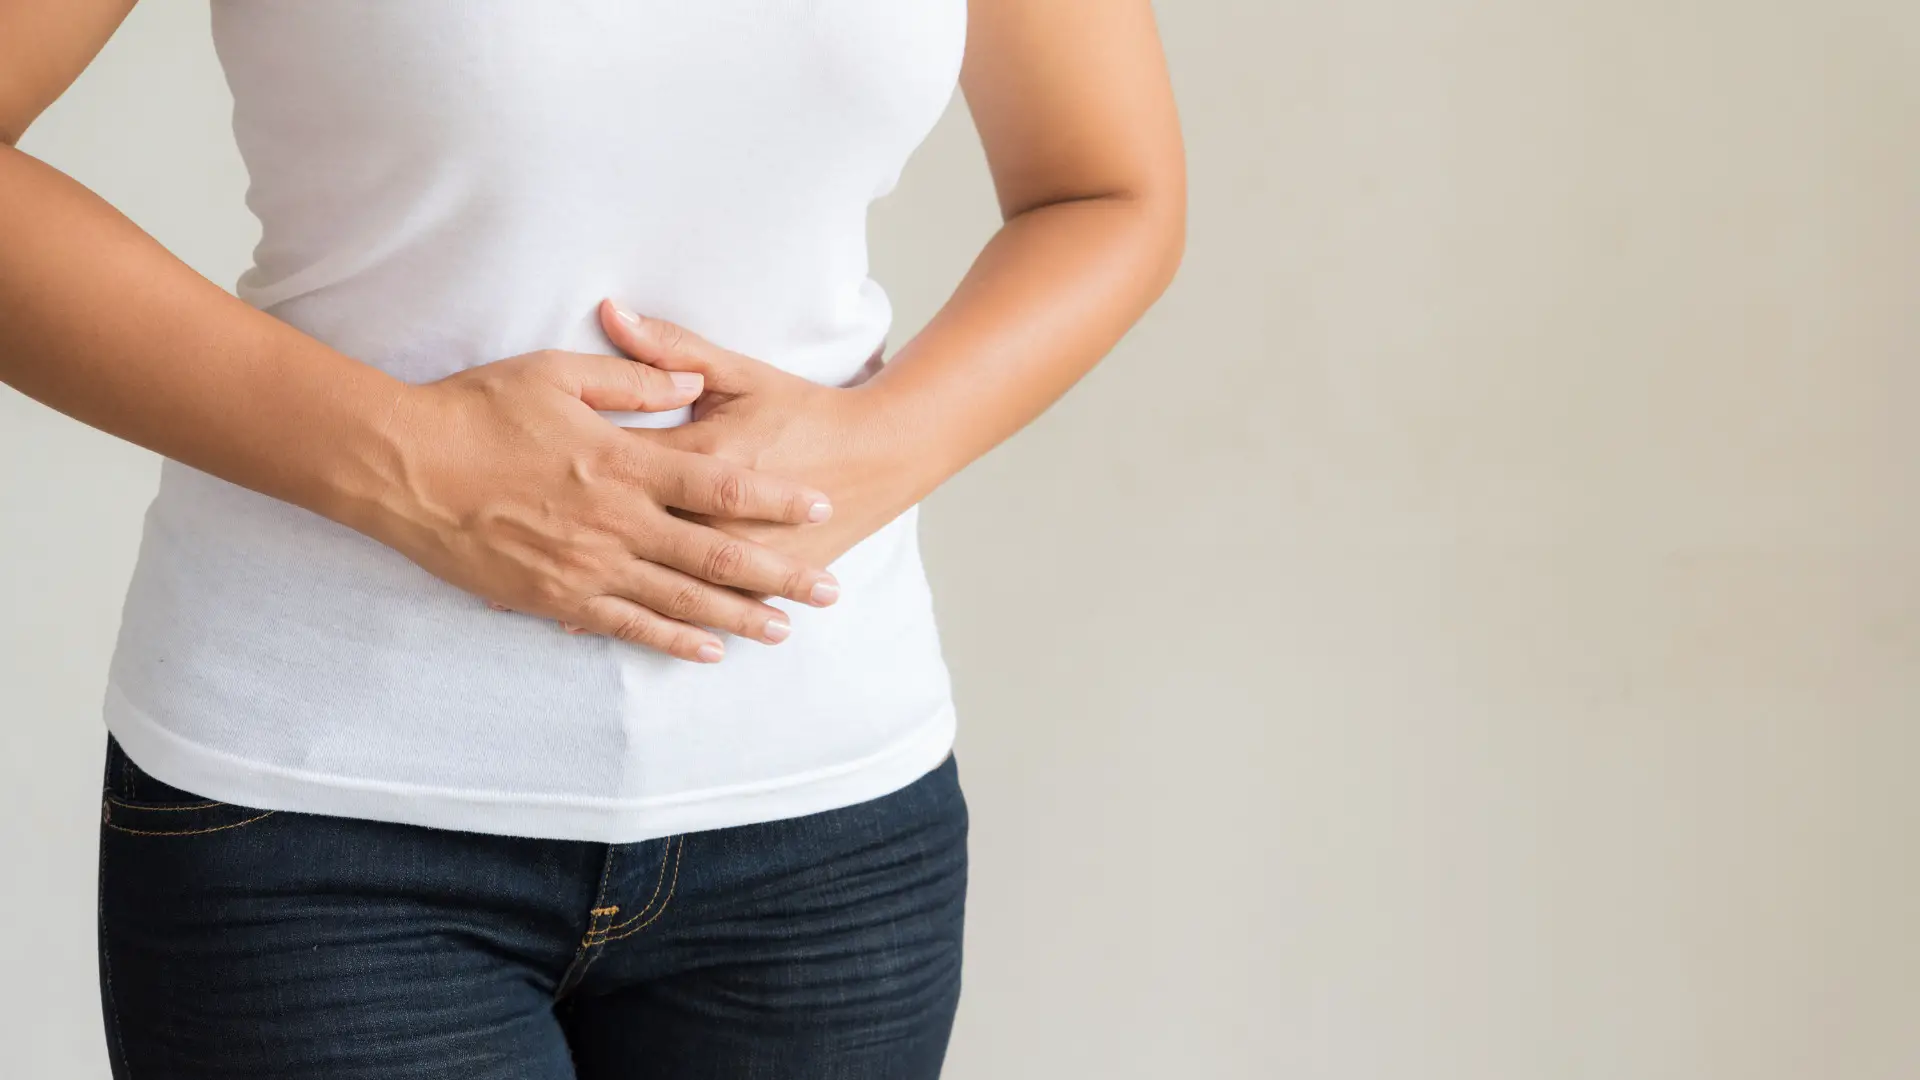 Foods That Cause Bloating: Understanding the Culprits